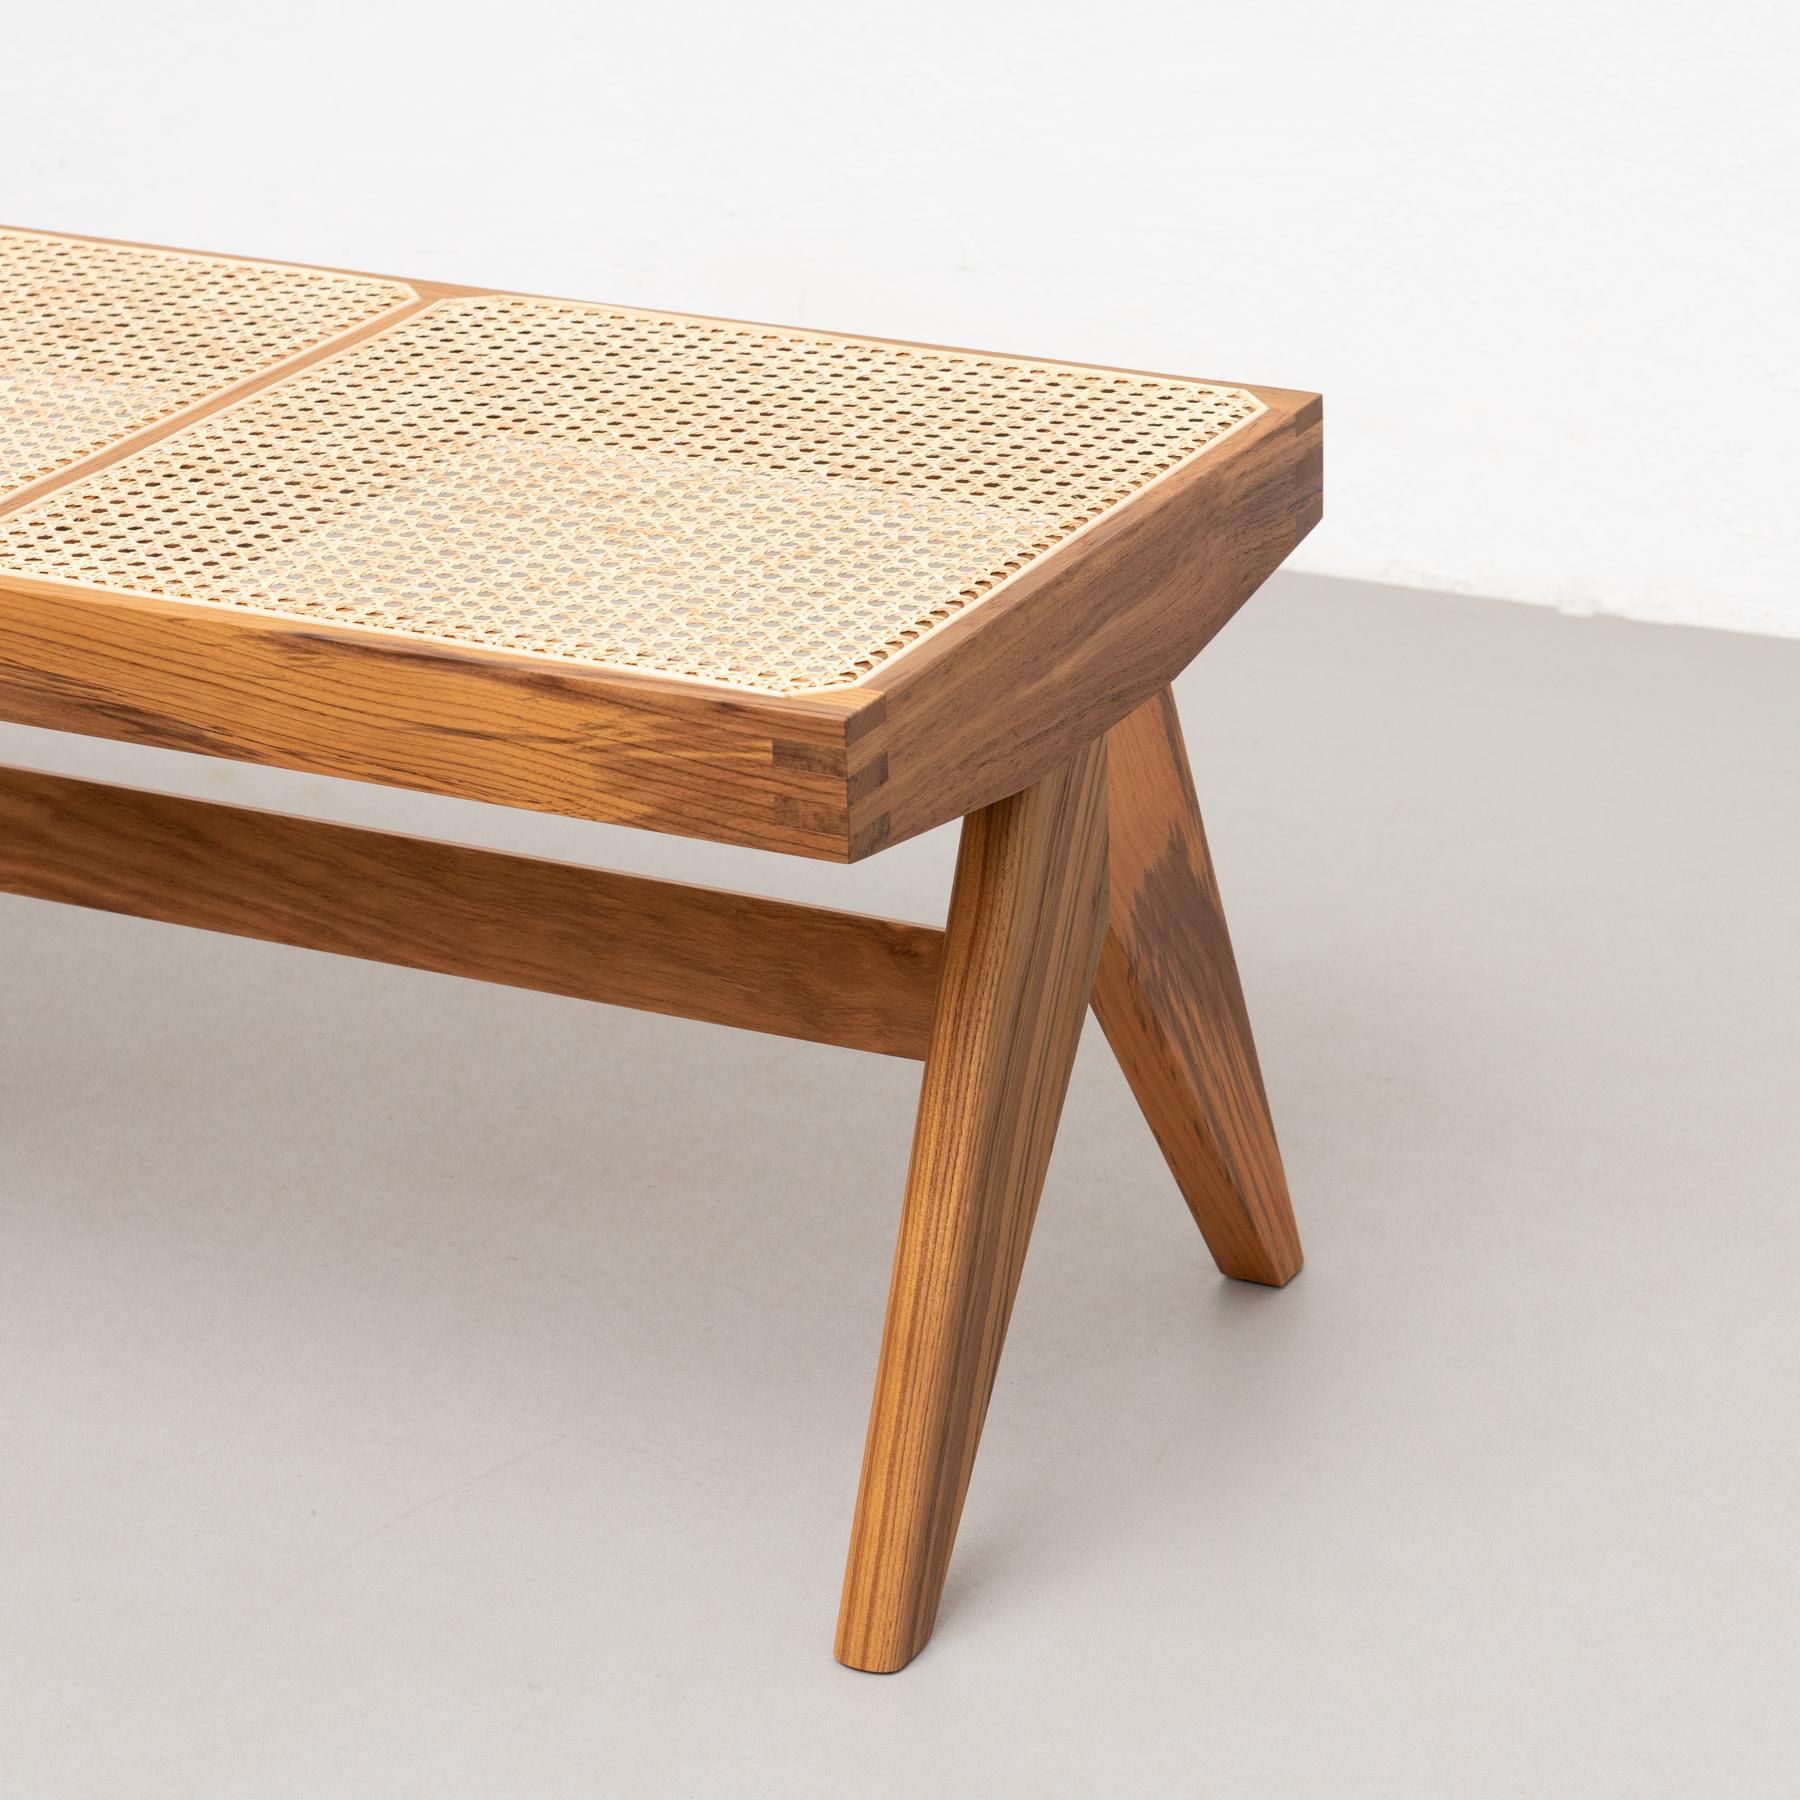 Pierre Jeanneret 057 Civil Bench, Wood and Woven Viennese Cane by Cassina 3